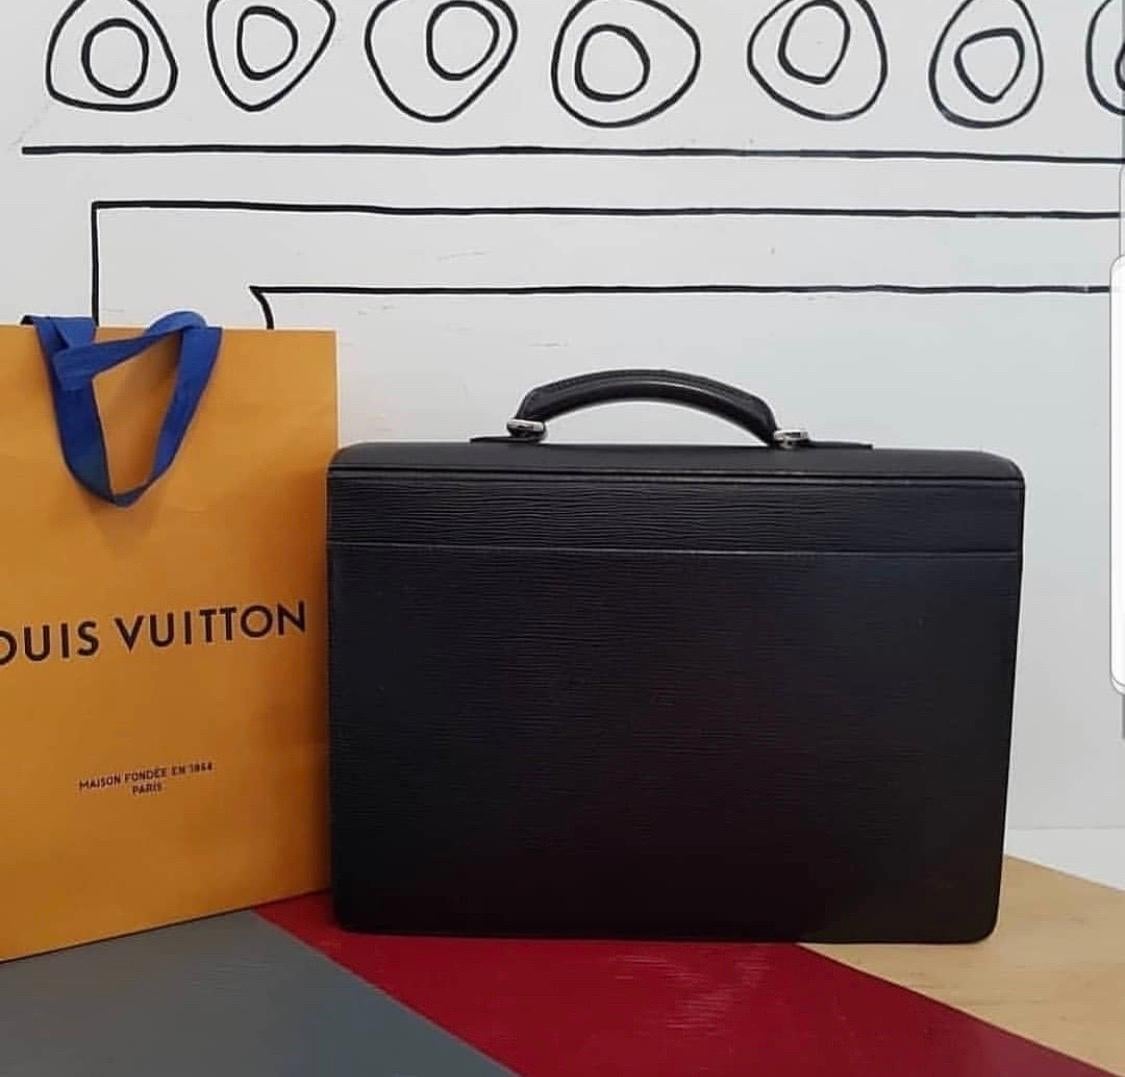 This classic briefcase from Louis Vuitton brings a whole new perspective to office repertoire. This Robusto 2 compartment briefcase is crafted from black Epi leather. The bag features subtle designing, a single top handle and a front flap with a